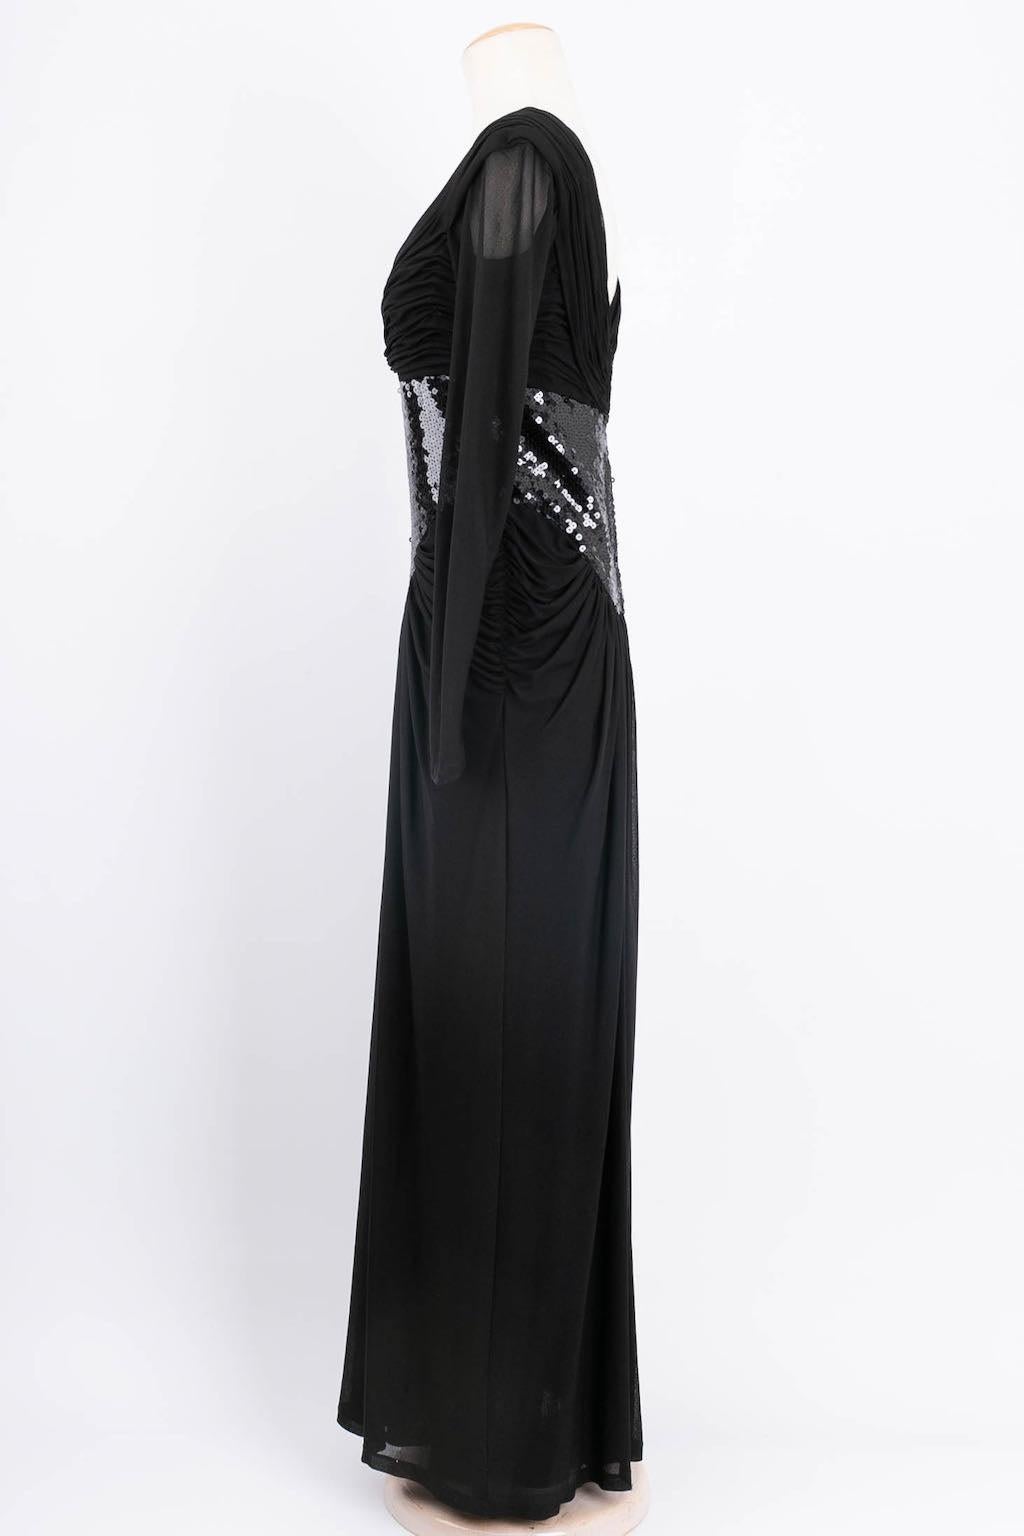 Azzaro (Made in France)Long dress in jersey embroidered with sequins. No composition or size tag, it fits a size 36FR.

Additional information: 
Dimensions: Bust: 74 cm (29.13